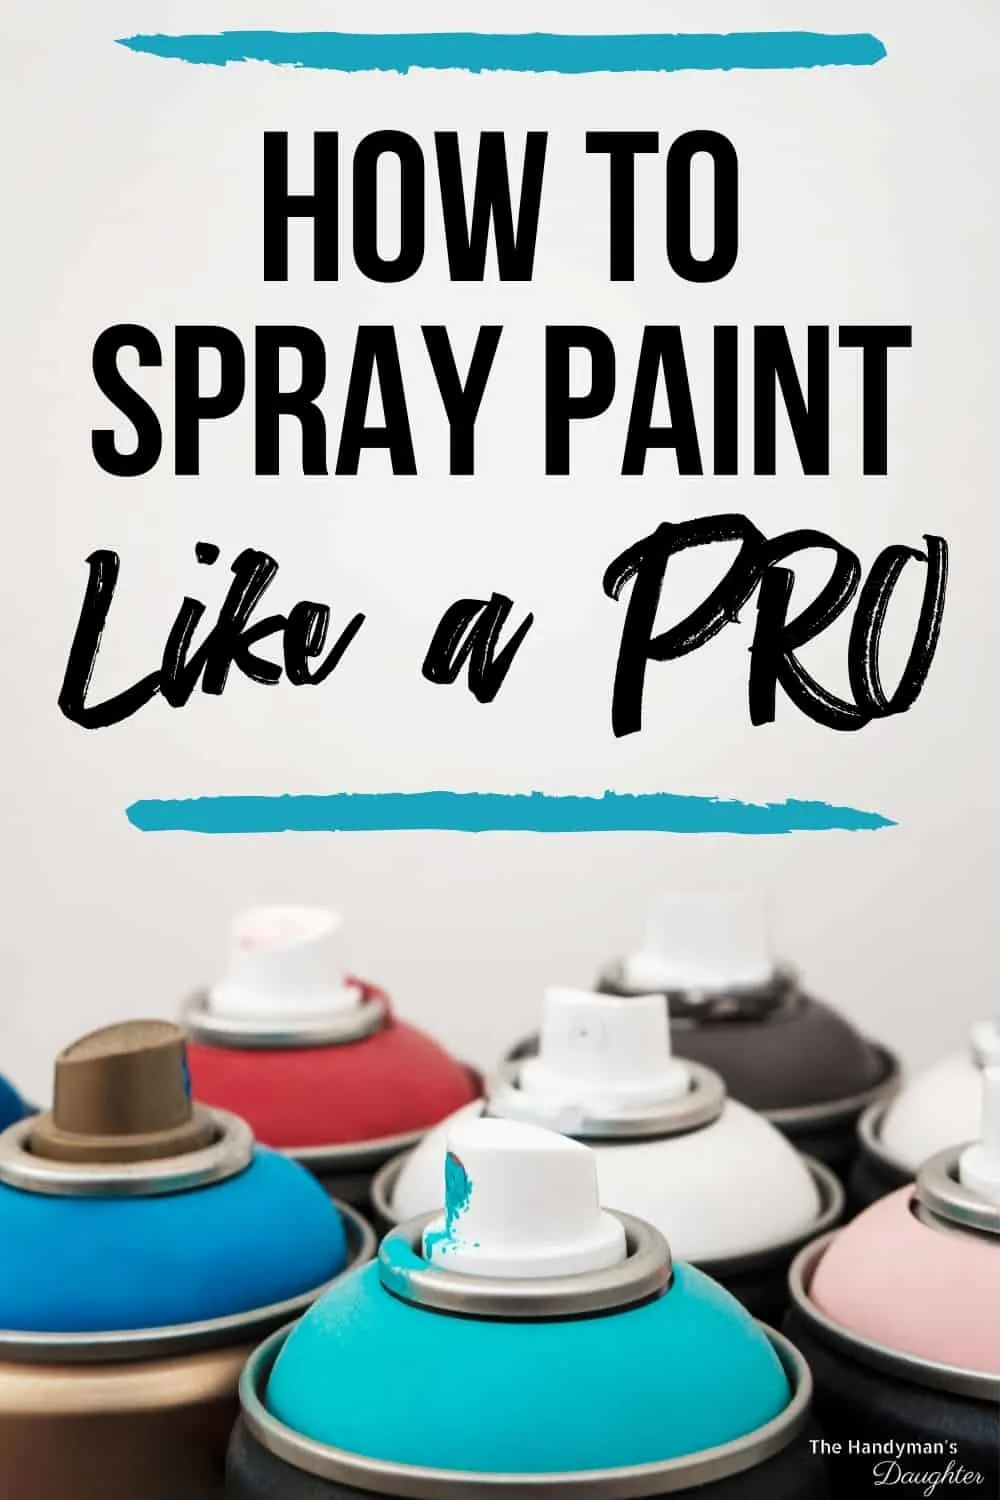 7 Spray Paint Tips: Do's and Don'ts to Keep in Mind for Your Next Project, Architectural Digest